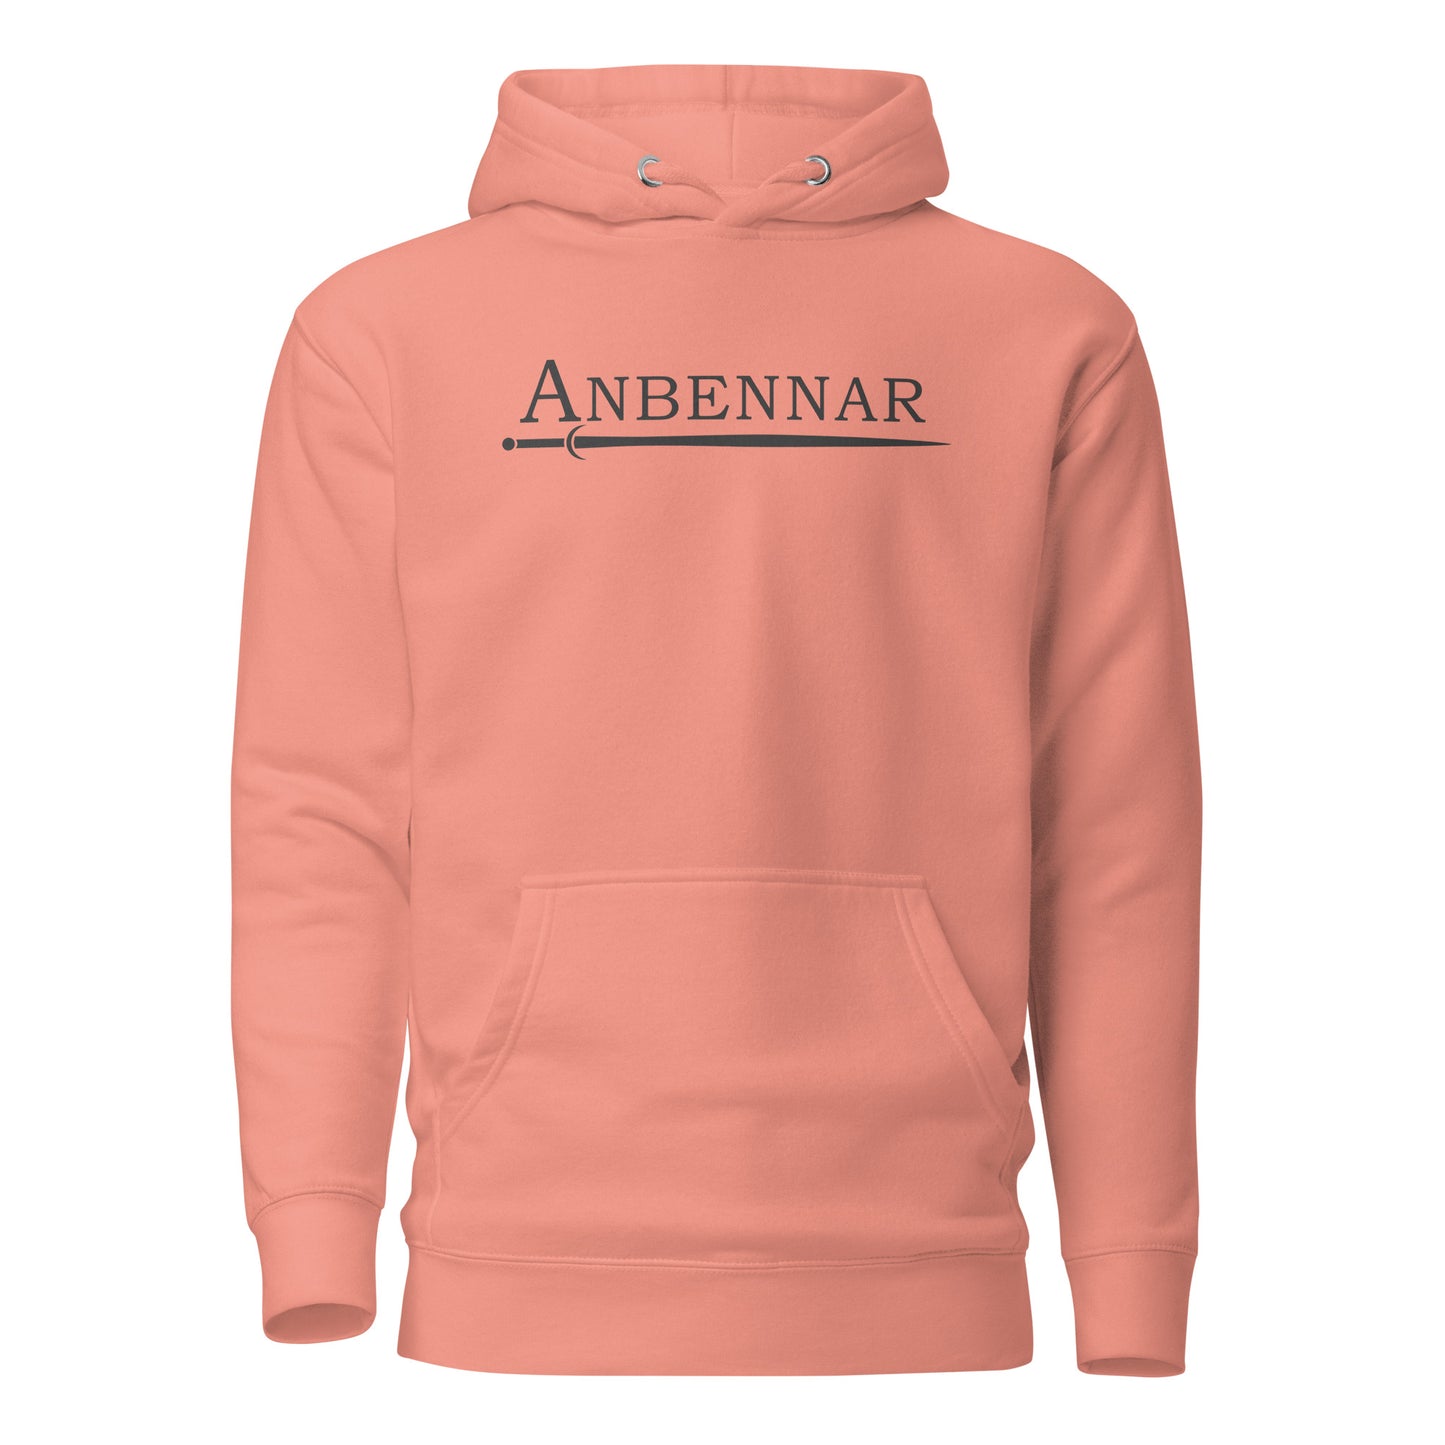 Anbennar Text Logo, Black Font - 1st Edition Limited - Unisex Hoodie